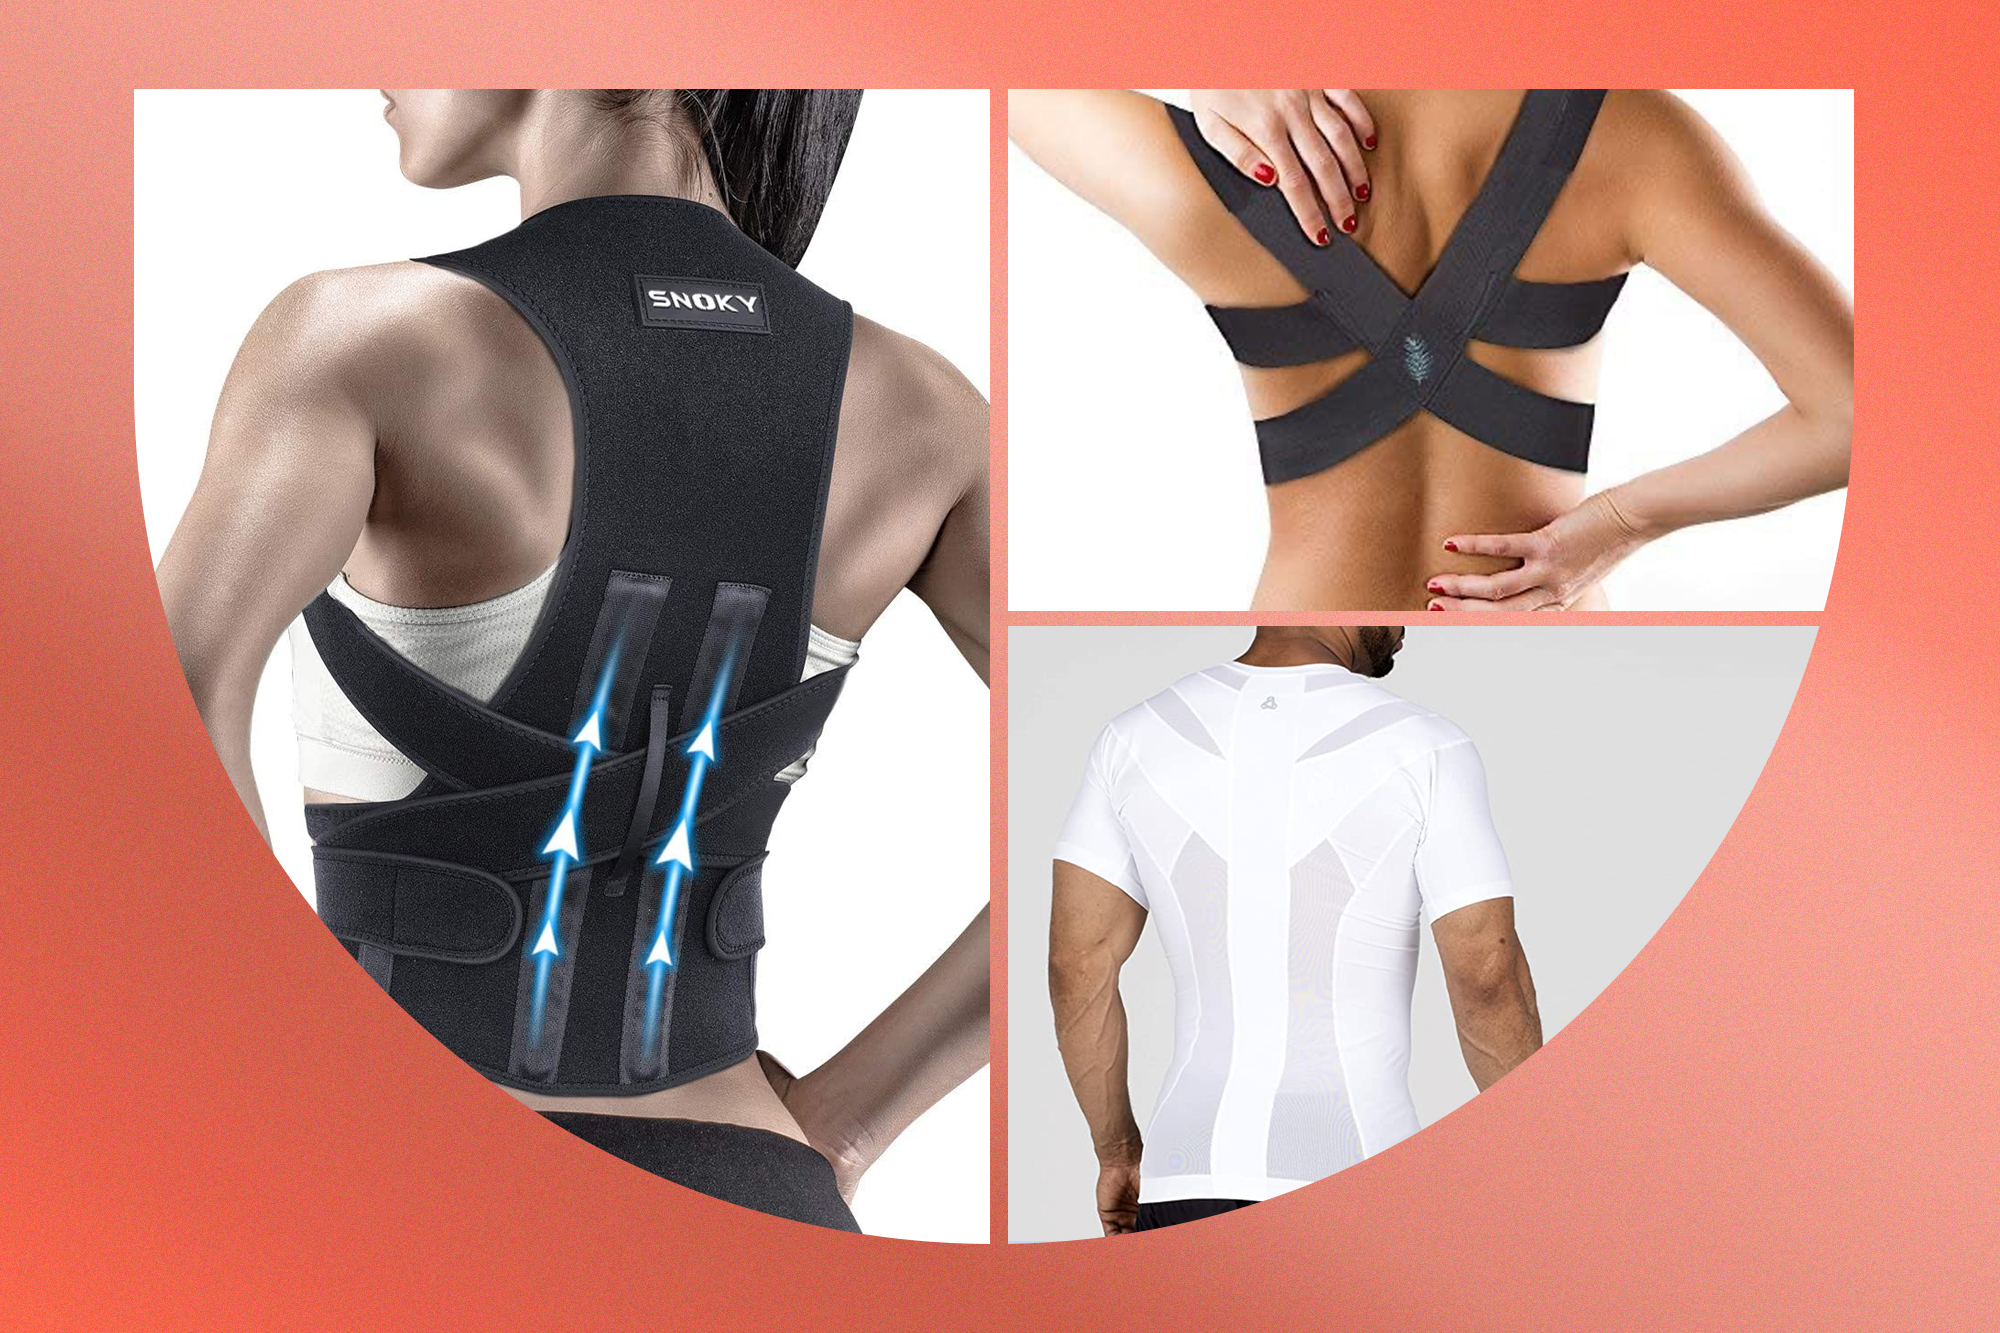 Top 9 Back Support Braces to Buy for Sitting at Work